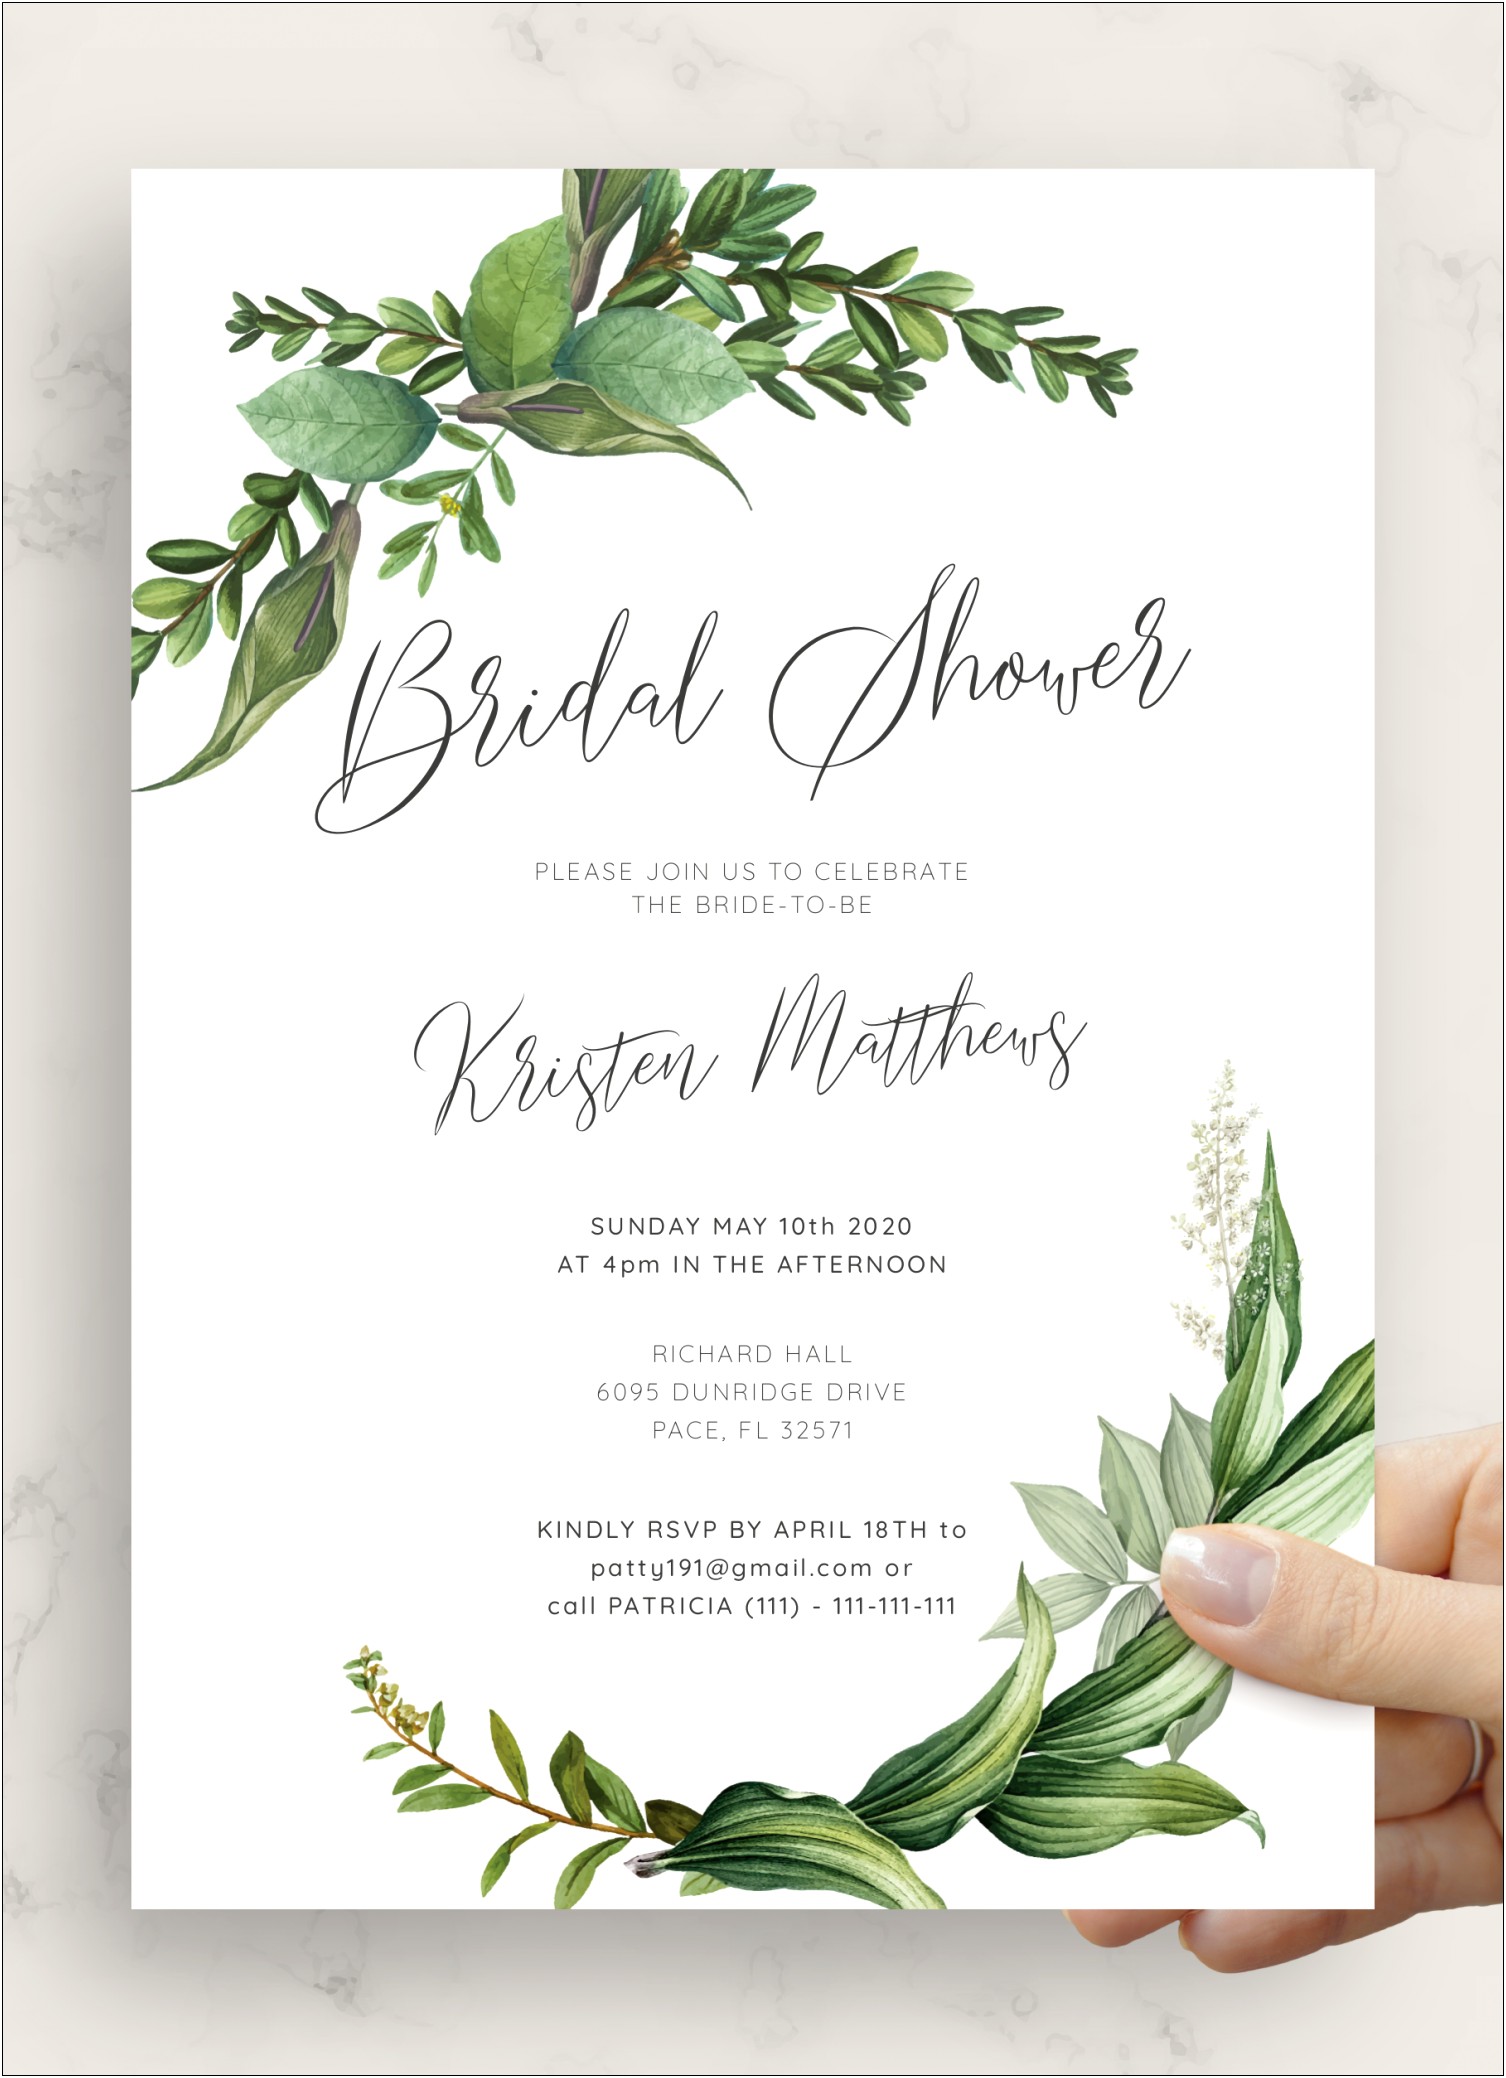 Wedding Shower Invitations Free Download Template